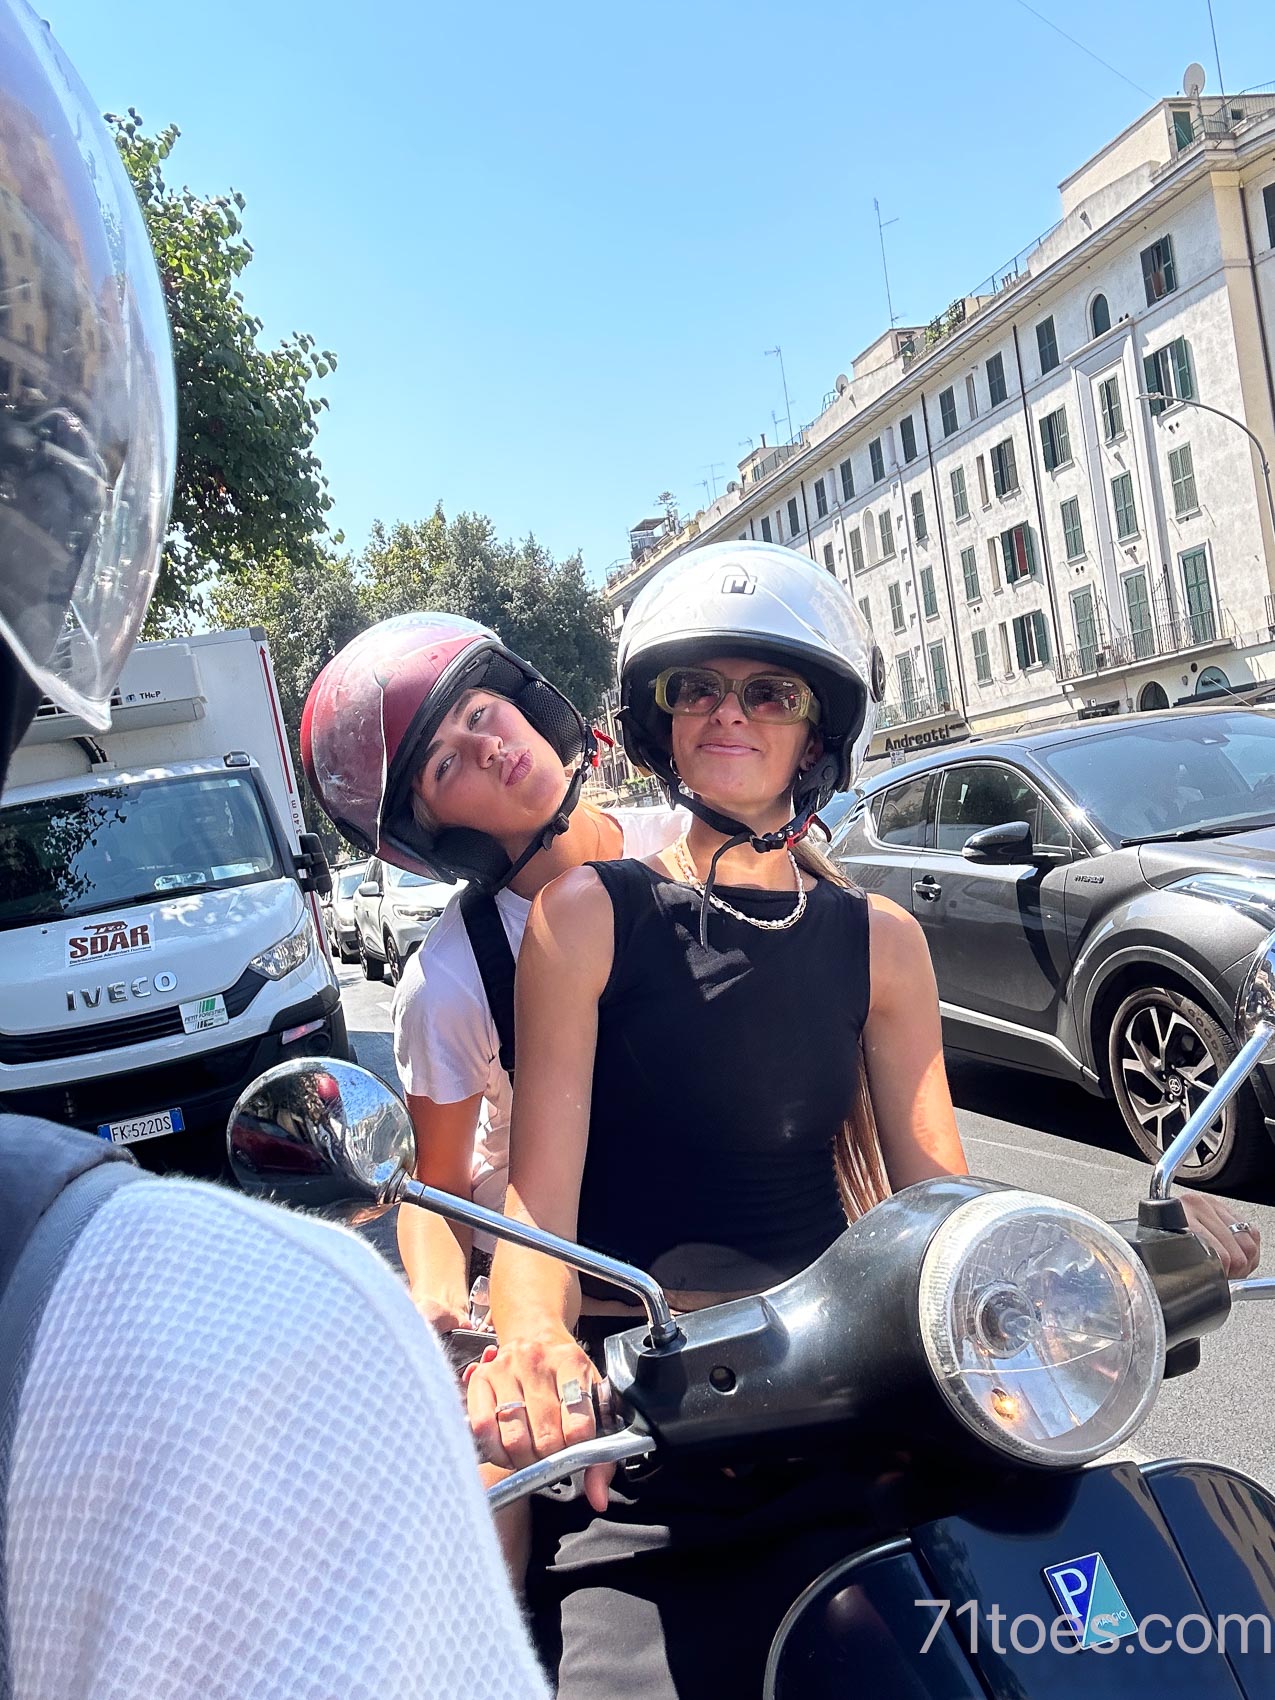 Elle and Claire exploring rome on a vespa